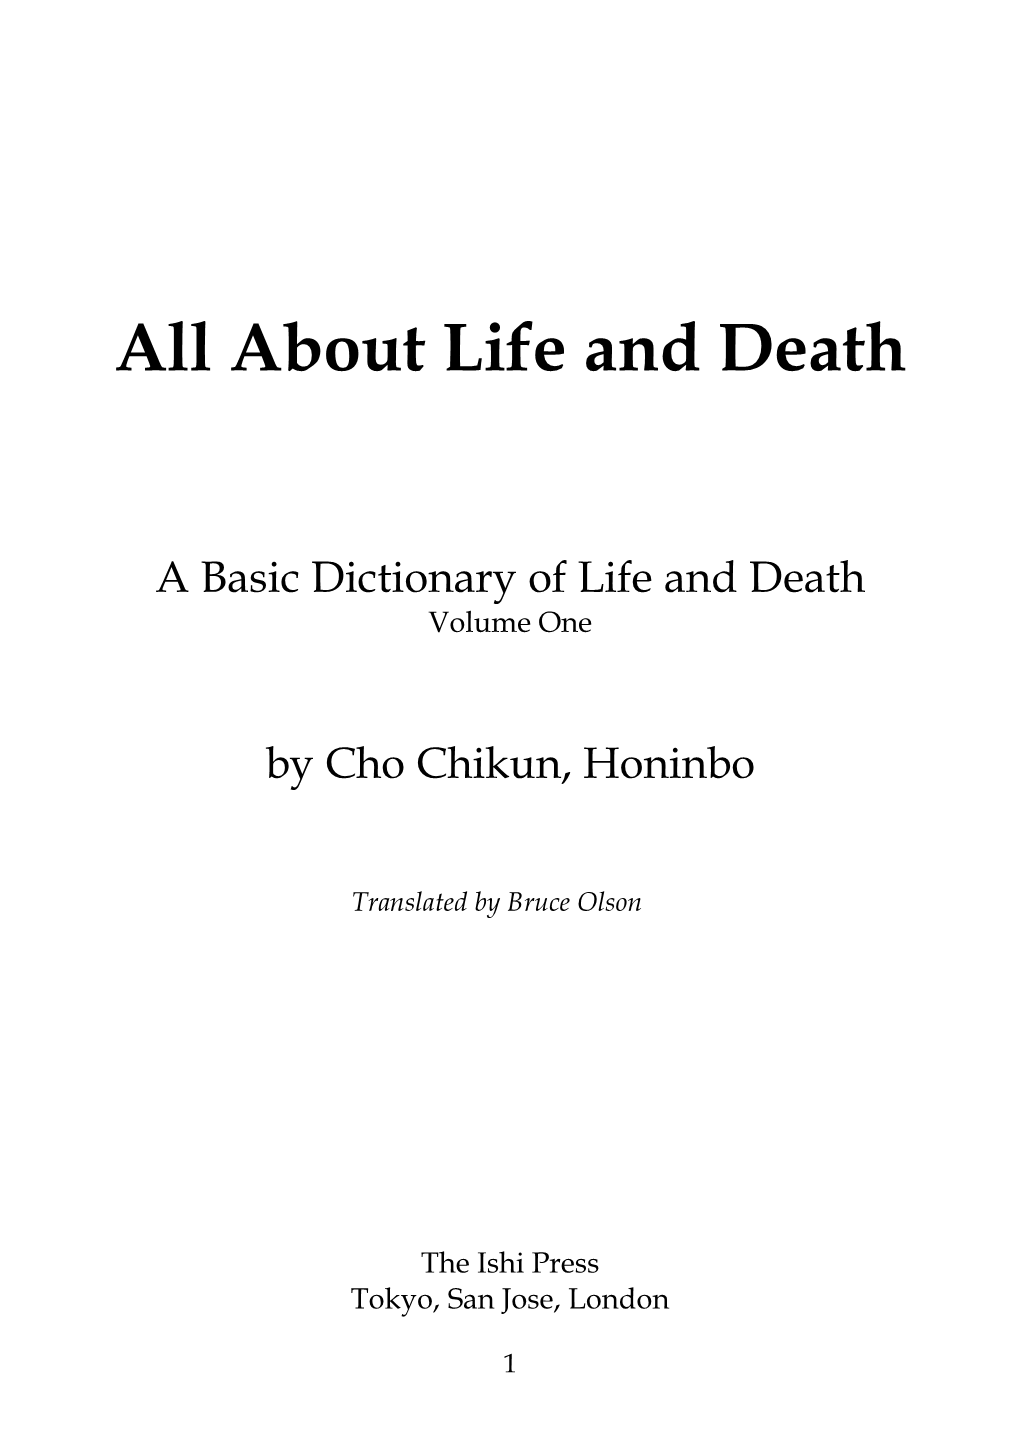 About Life and Death